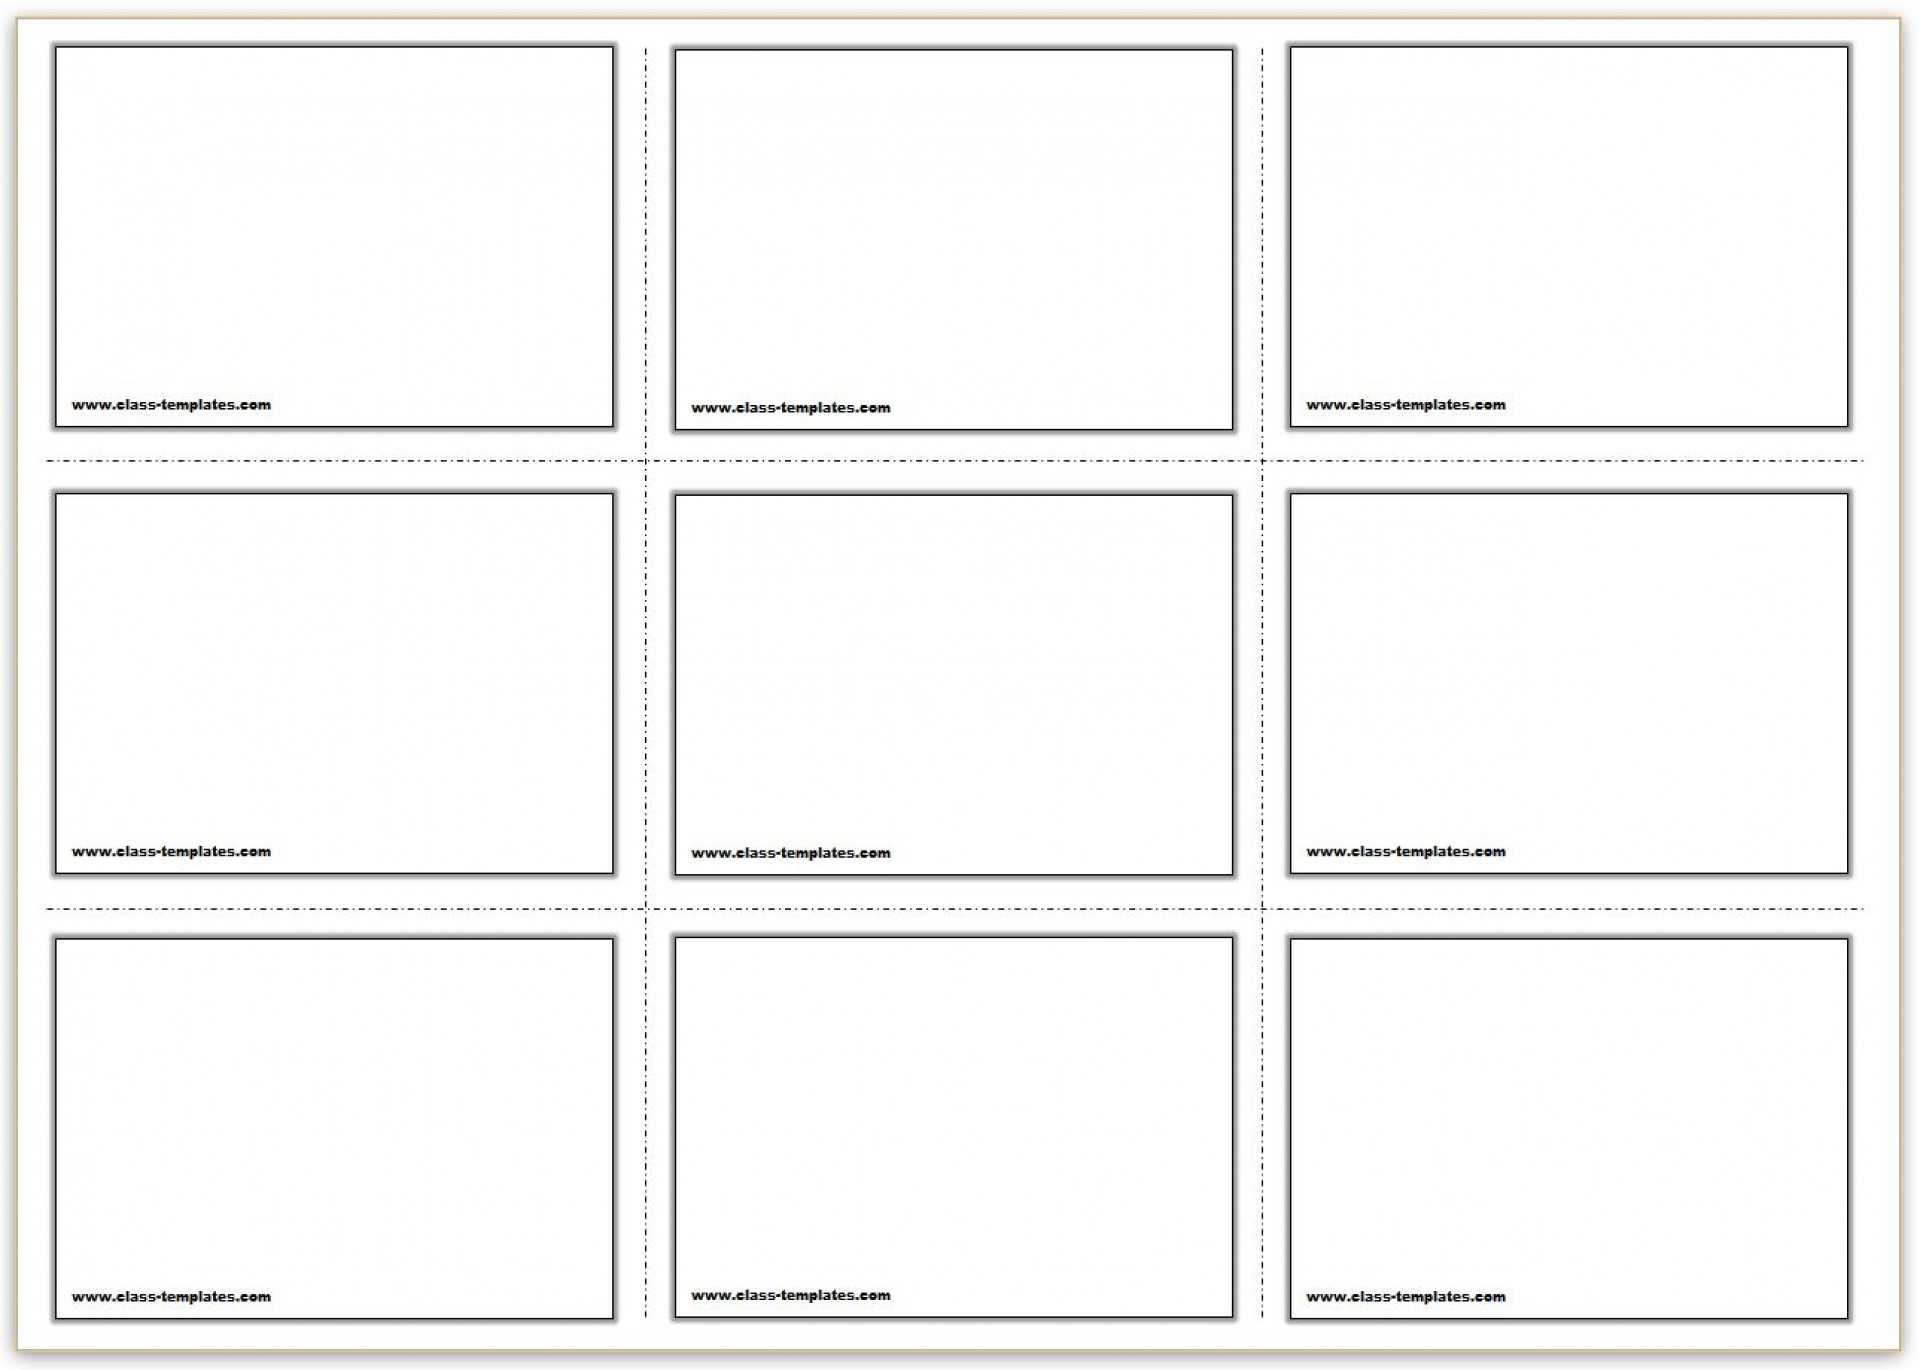 002 Printable Flash Cards Template 3X3 Ideas Free Card In Free Printable Blank Flash Cards Template